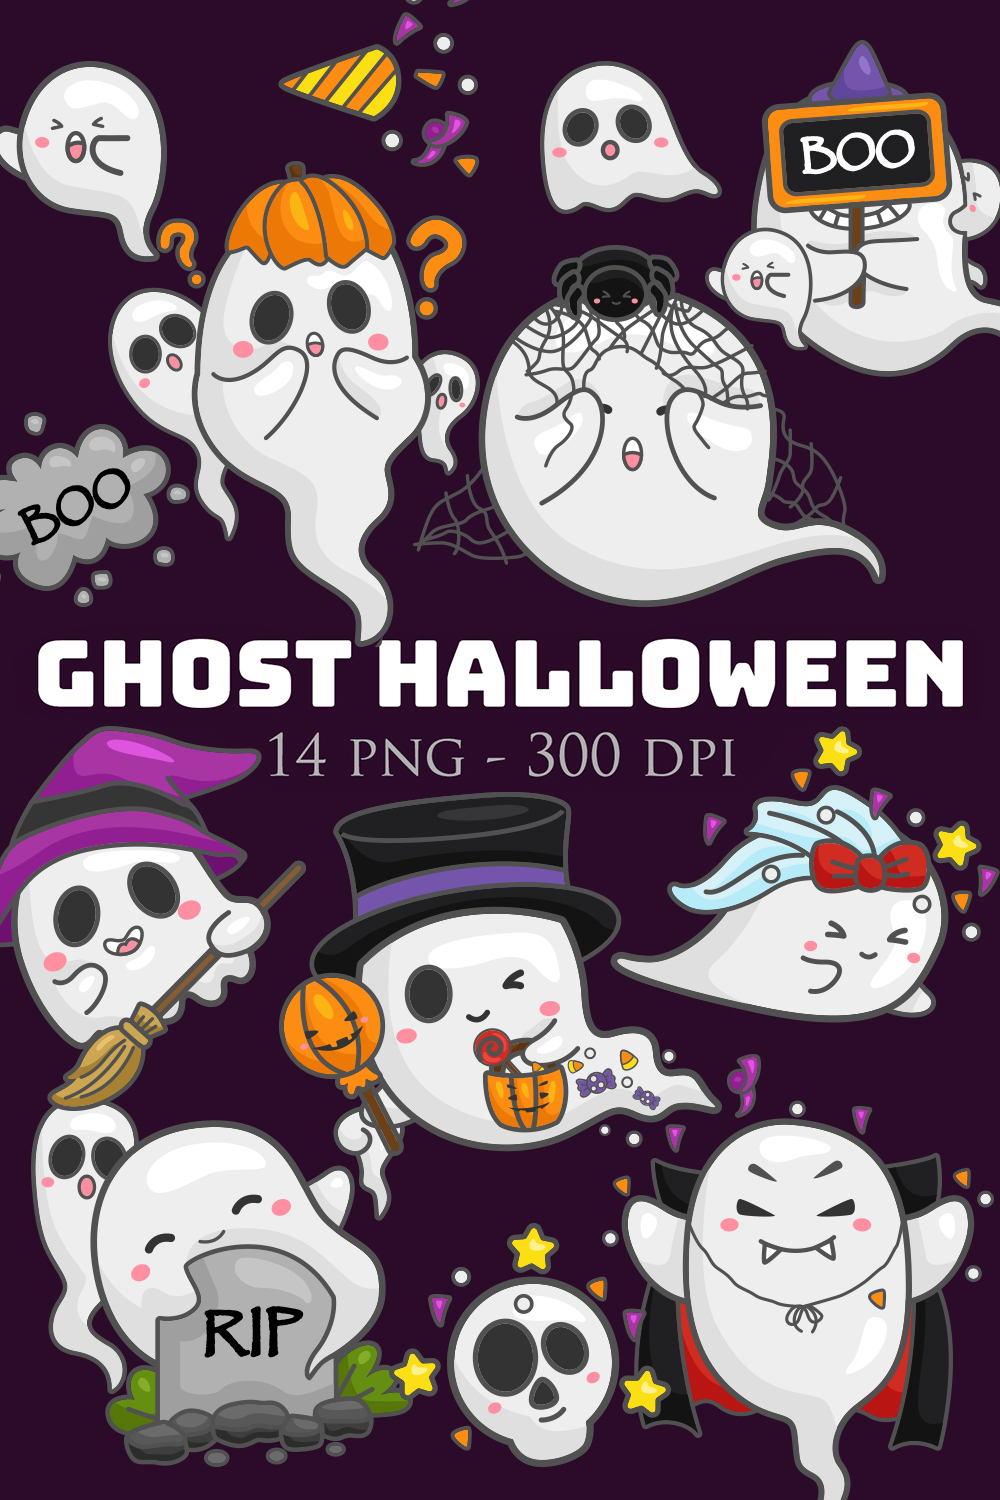 Cute Funny Ghost Halloween Jack O Lantern Pumpkin Cartoon Background Decoration Party Illustration Vector Clipart Sticker pinterest preview image.